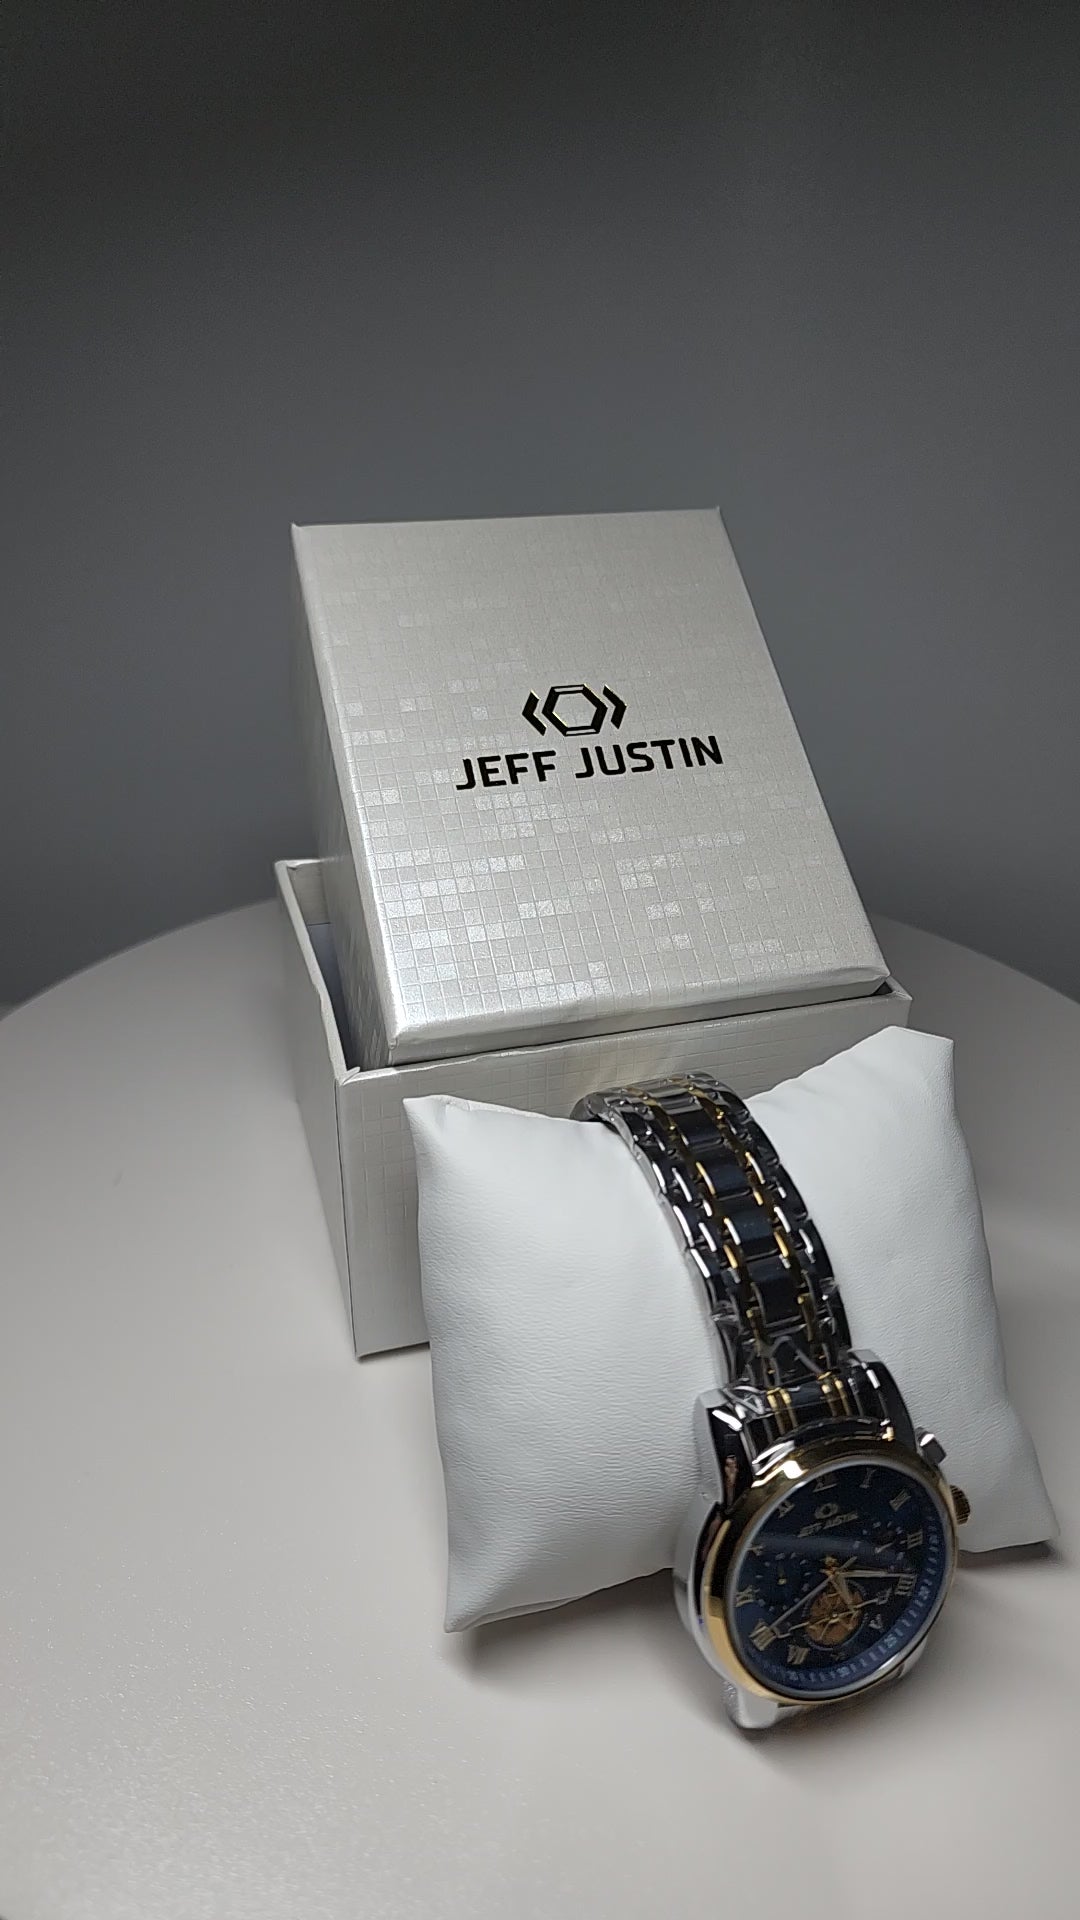 Justin watches prices in South Africa (with images) - Briefly.co.za